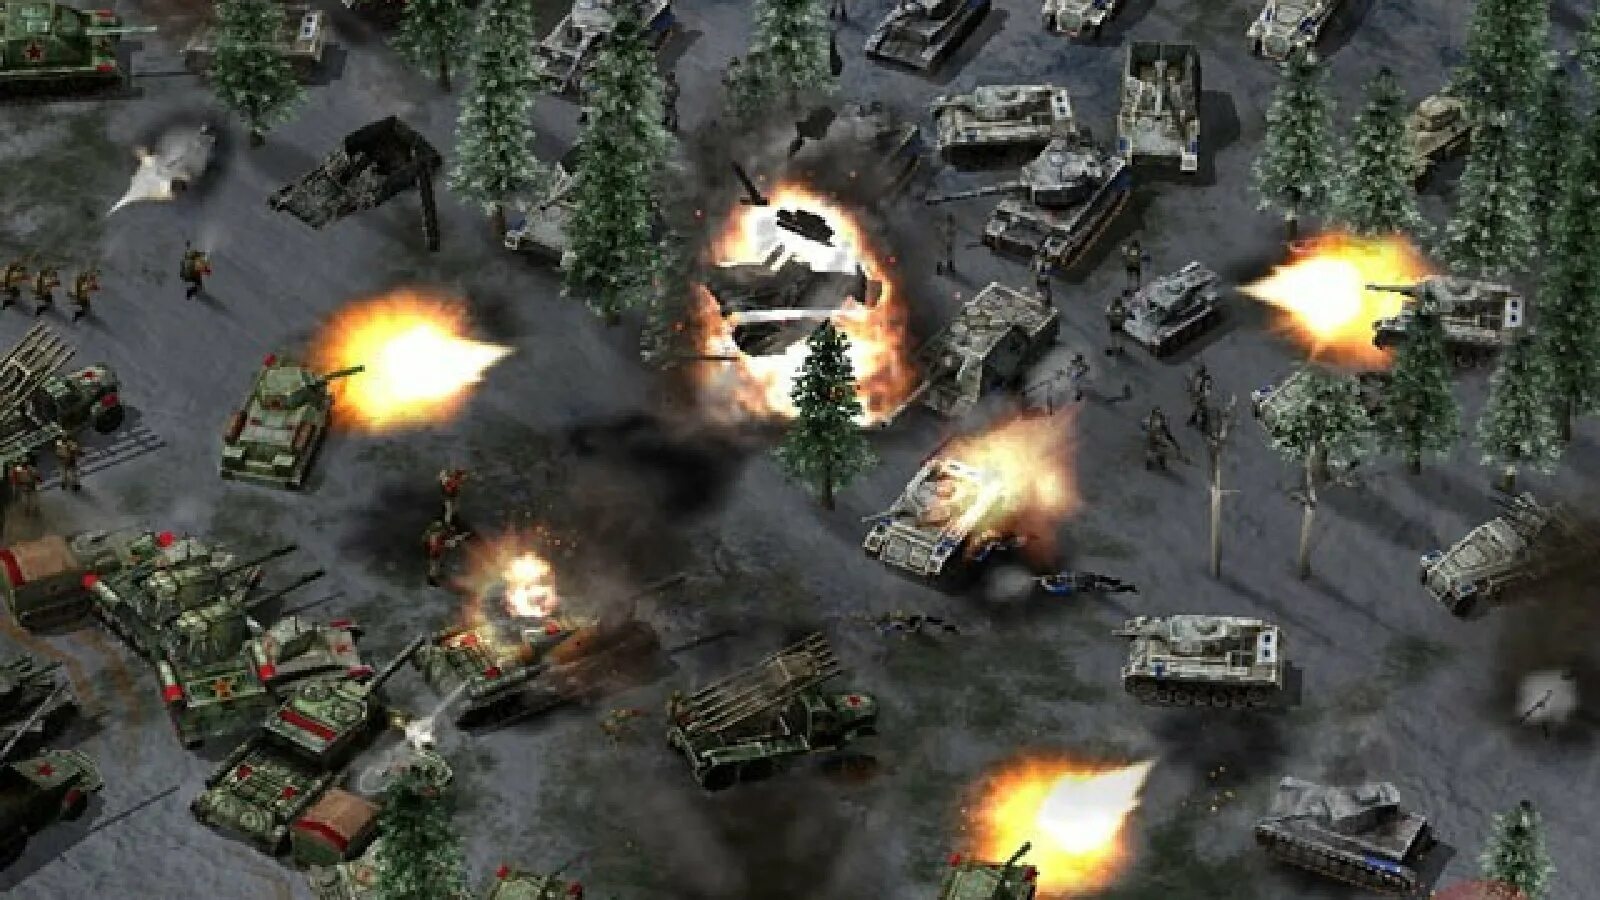 Игра Axis and Allies. Axis & Allies (2004). Axis and Allies (2004) PC. Axis & Allies RTS. Стратегия всех стран